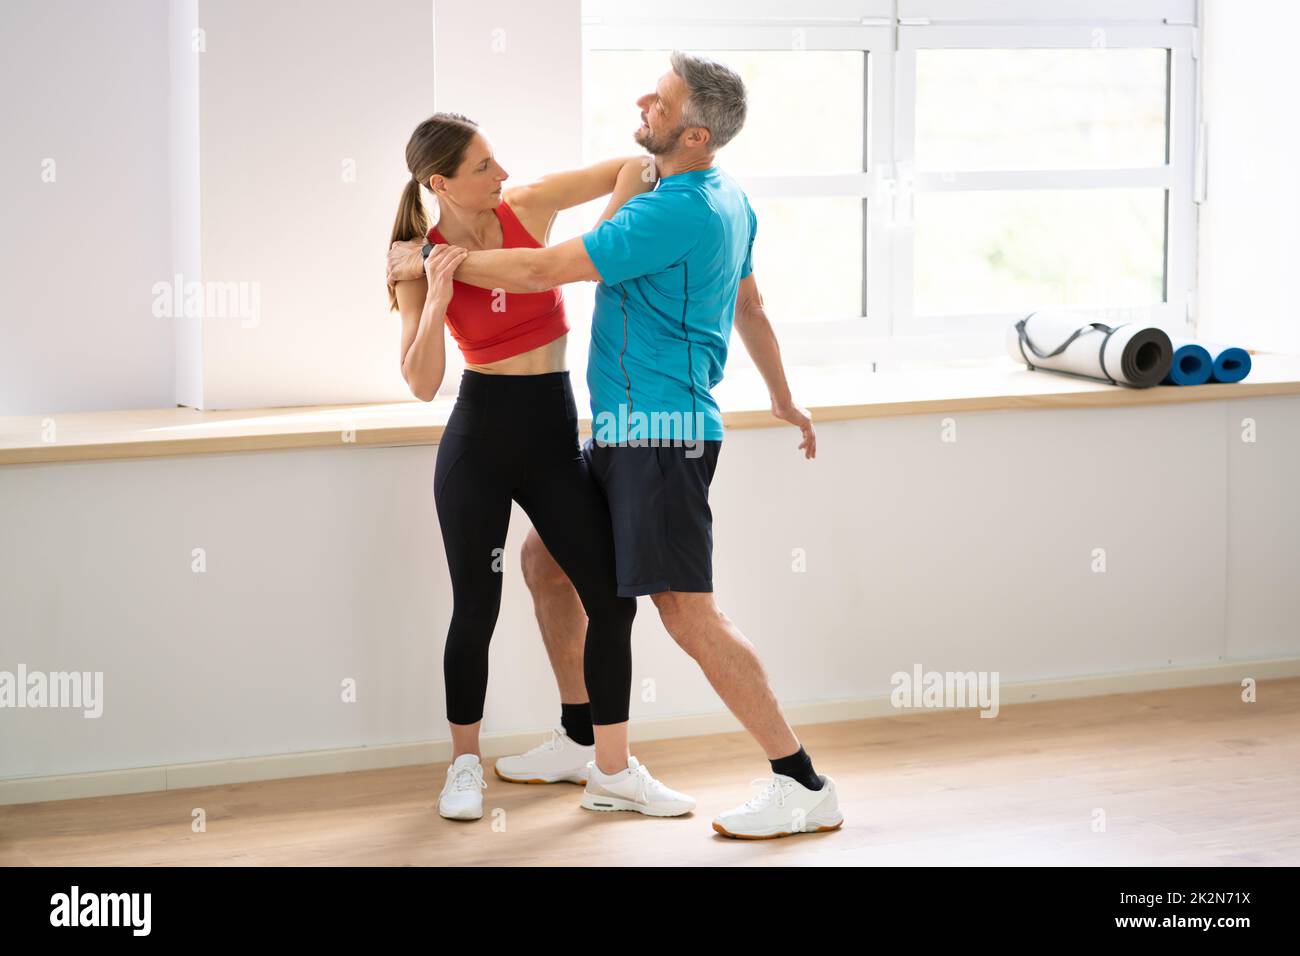 Fight Sparring Fitness Training In Gym. Female Power Stock Photo